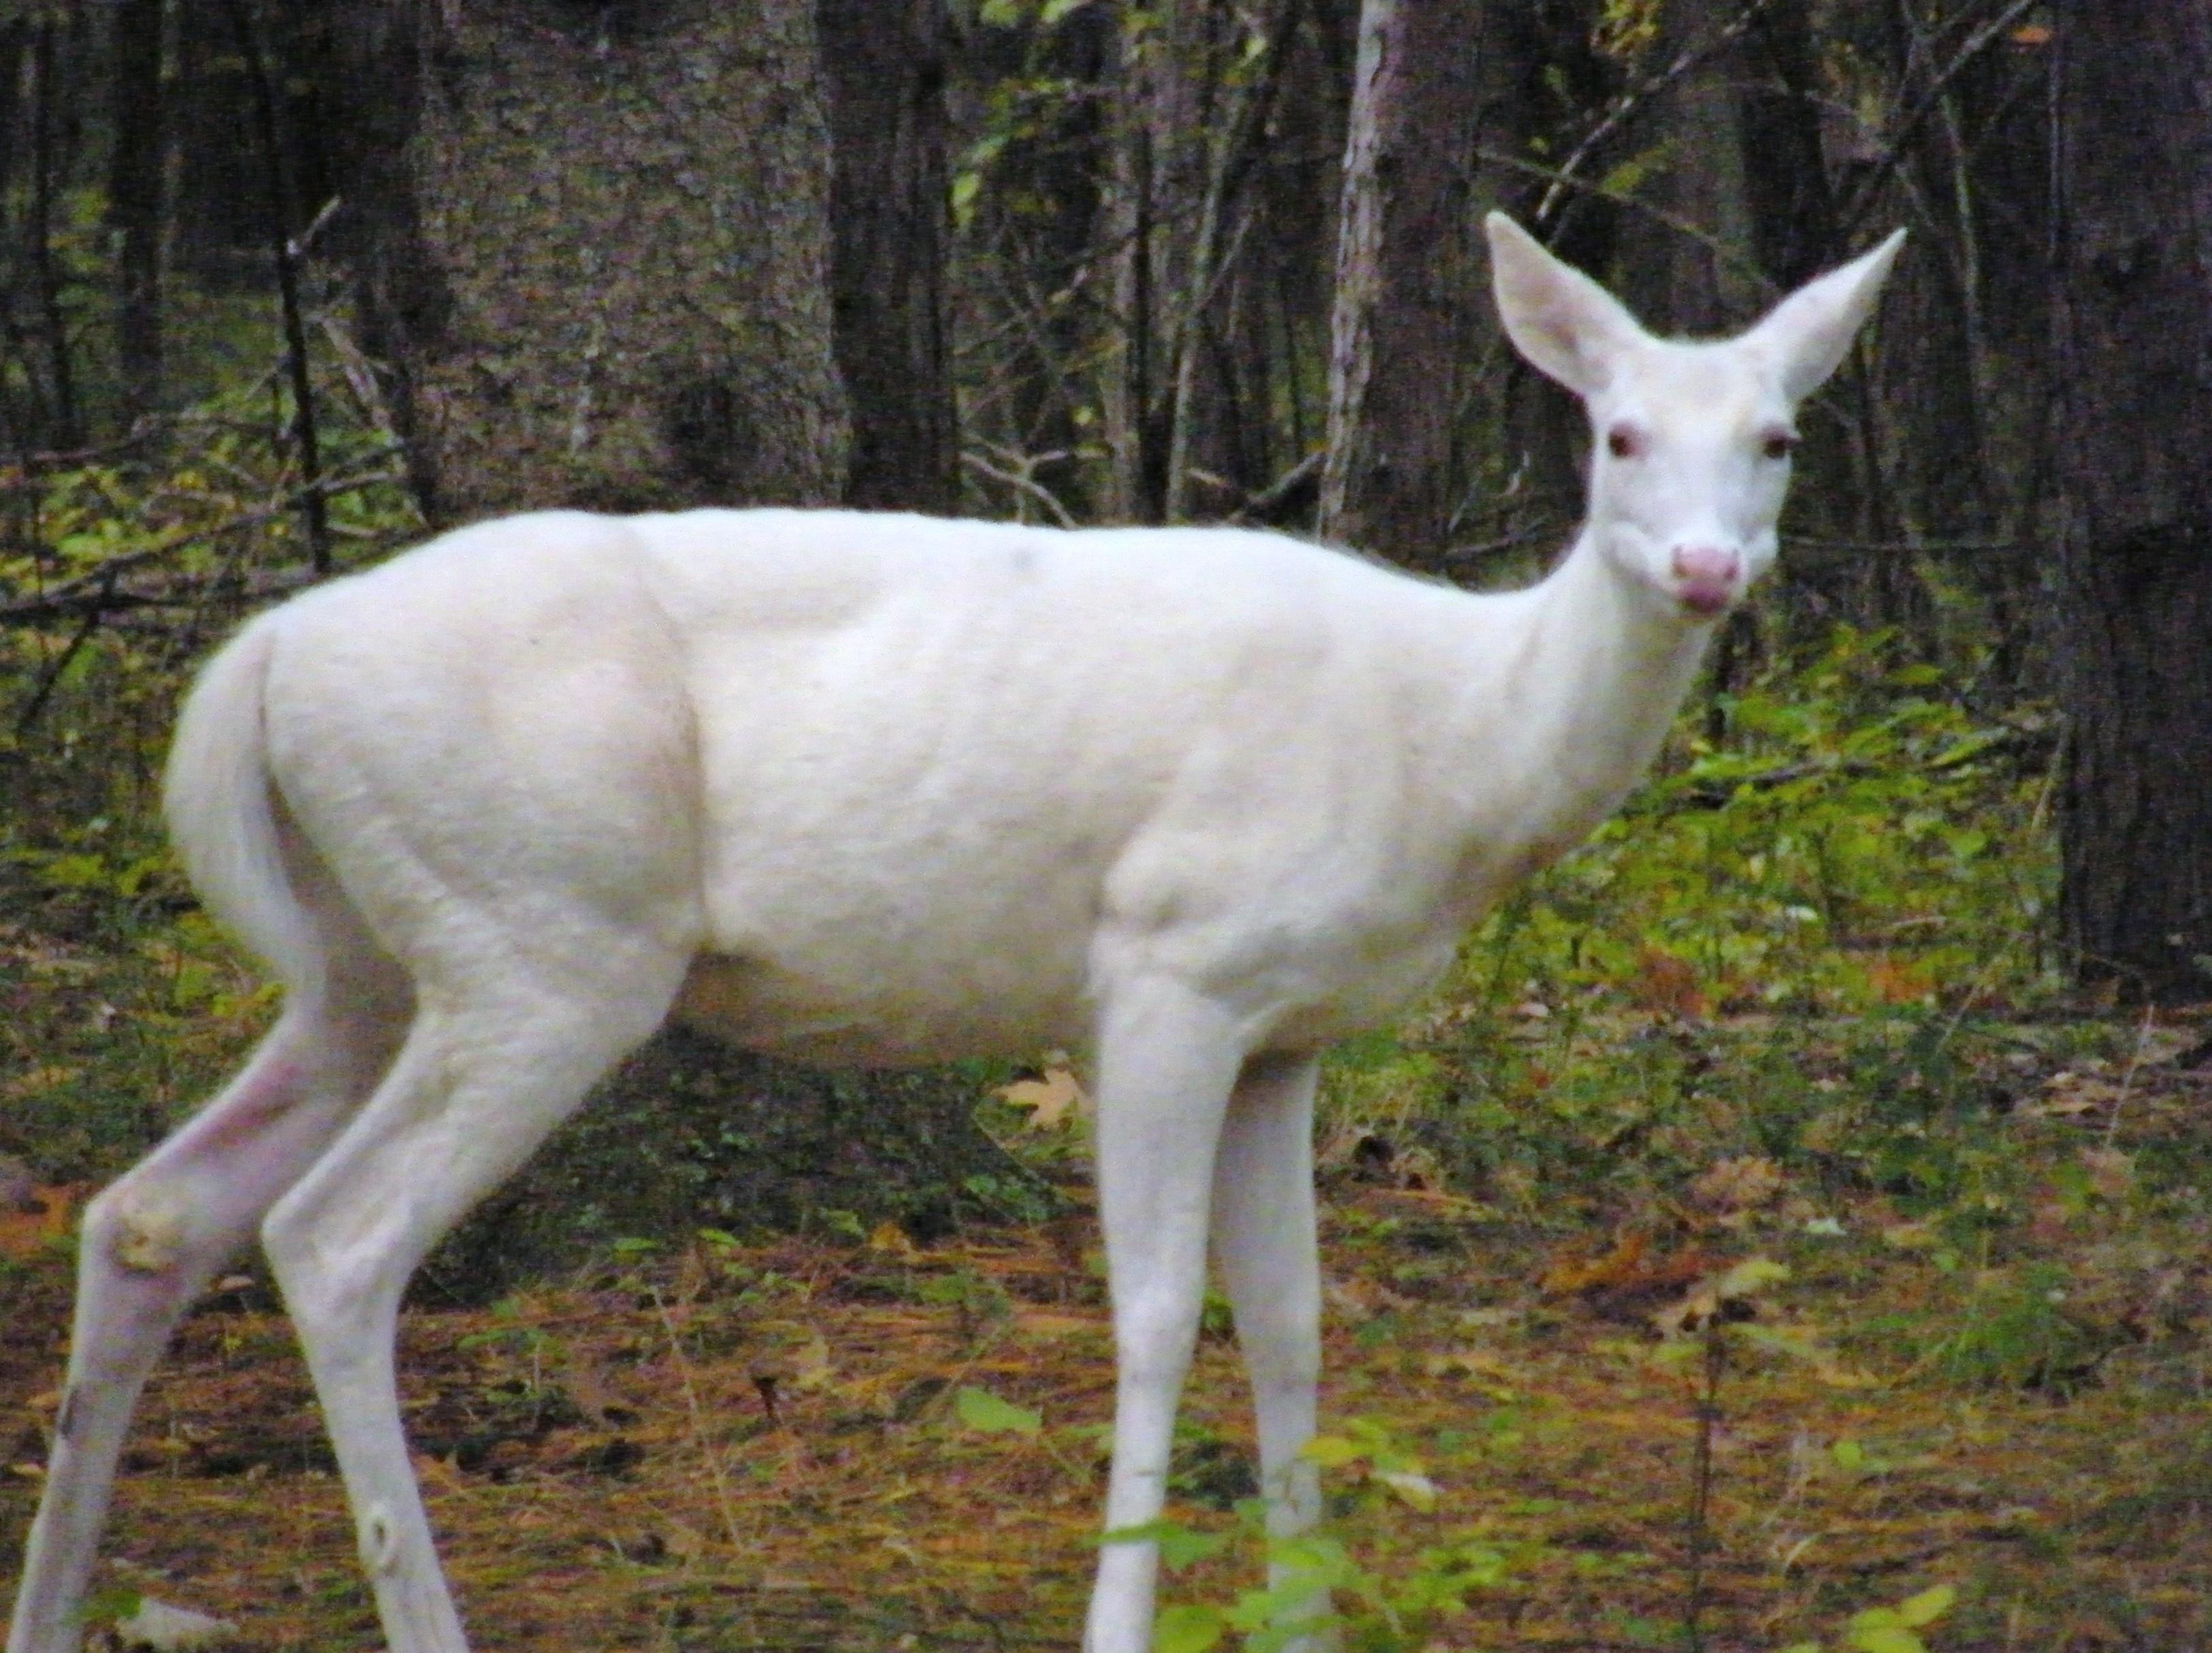 Young white deer